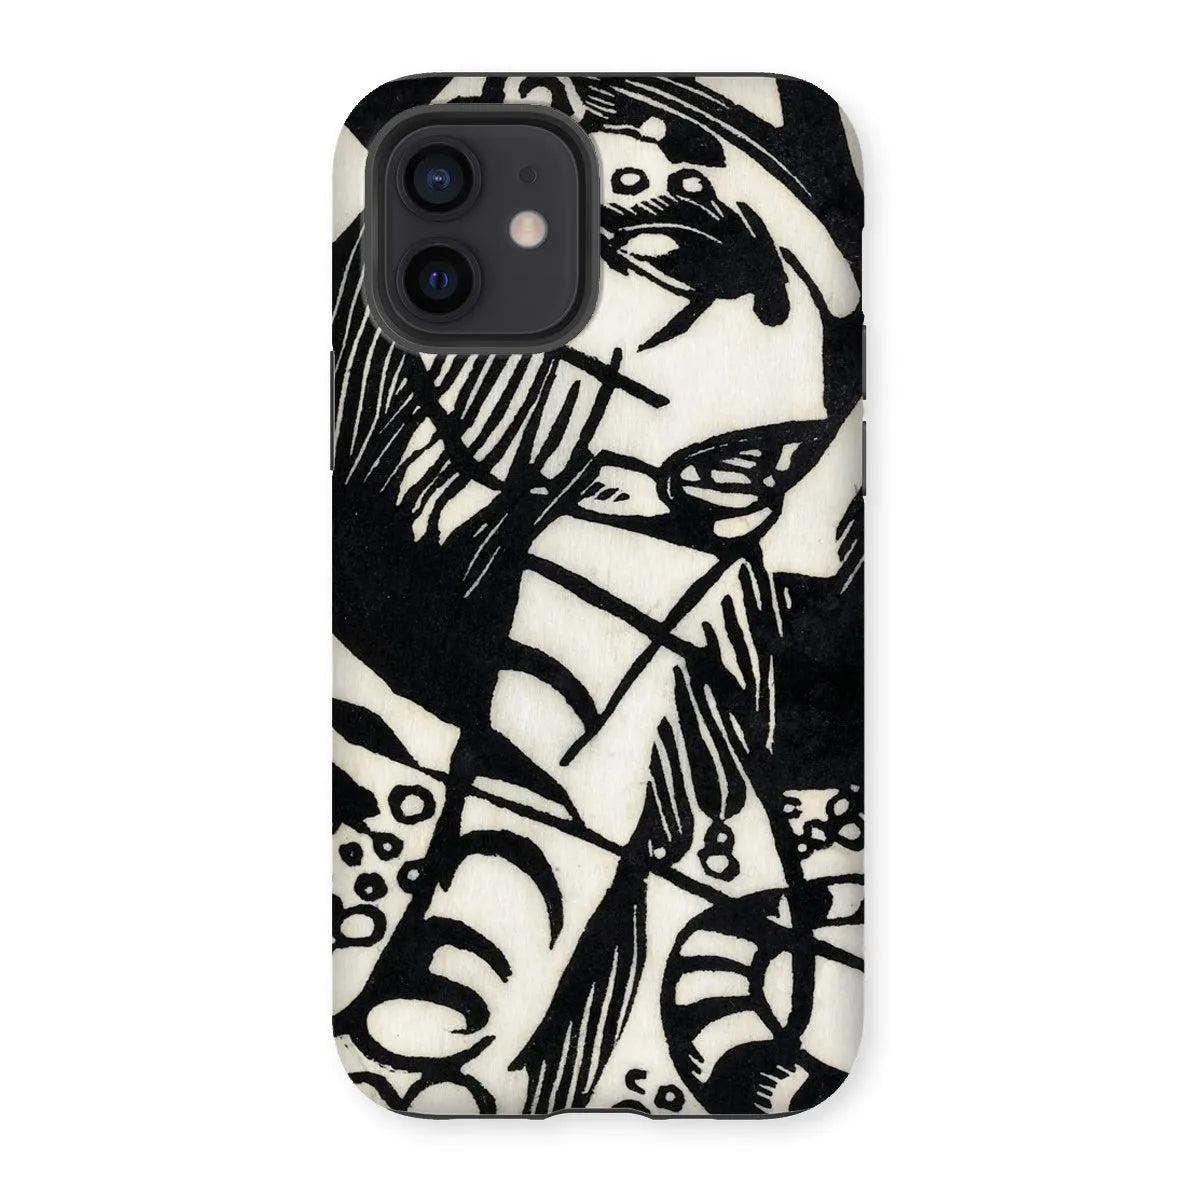 Tiger - Animal Aesthetic Phone Case - Franz Marc - Iphone 12 / Matte - Mobile Phone Cases - Aesthetic Art